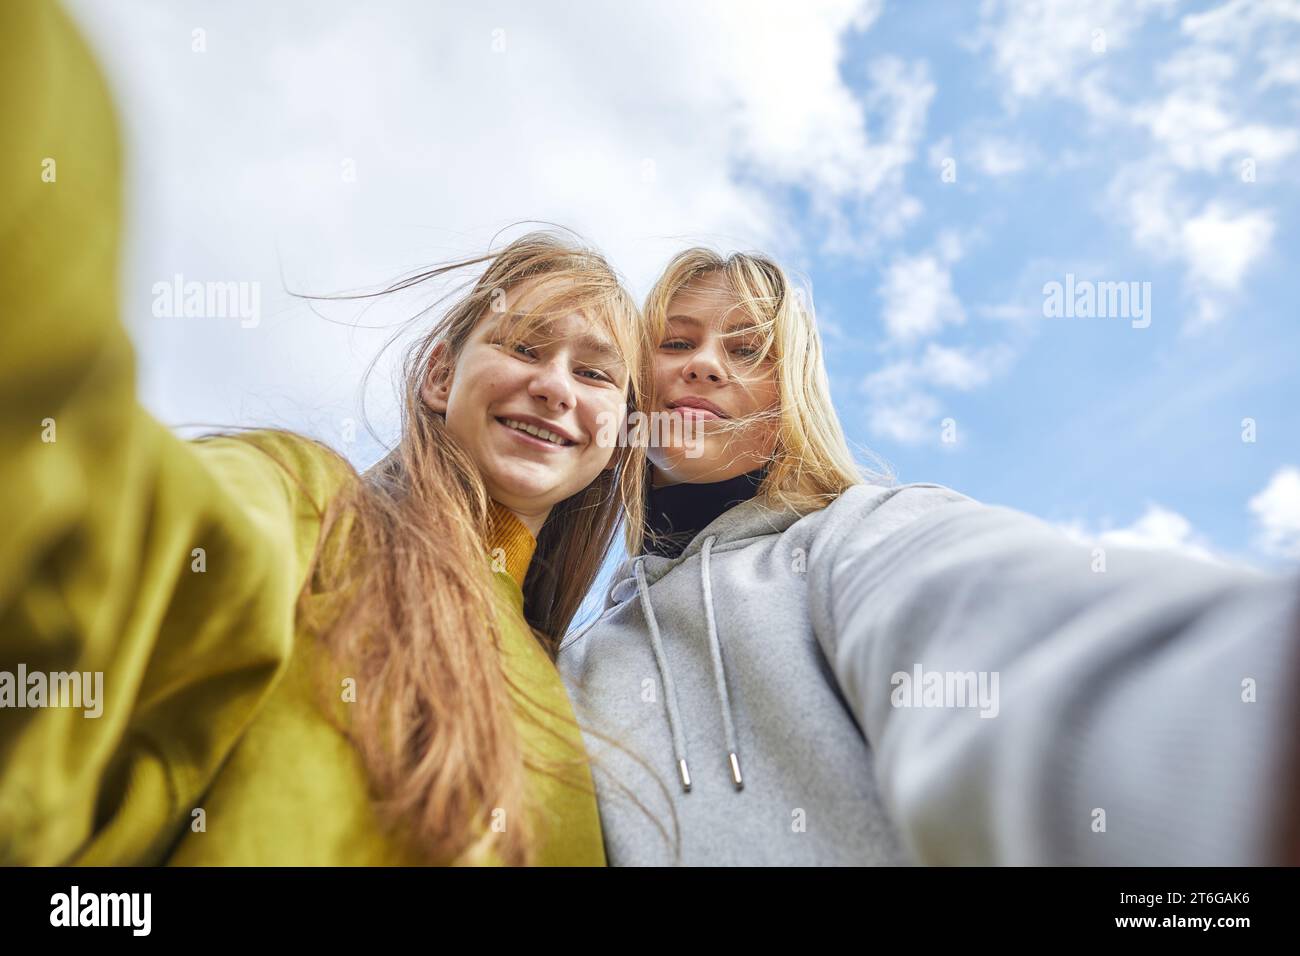 two playful teenage girls posing for a selfie against sky Stock Photo